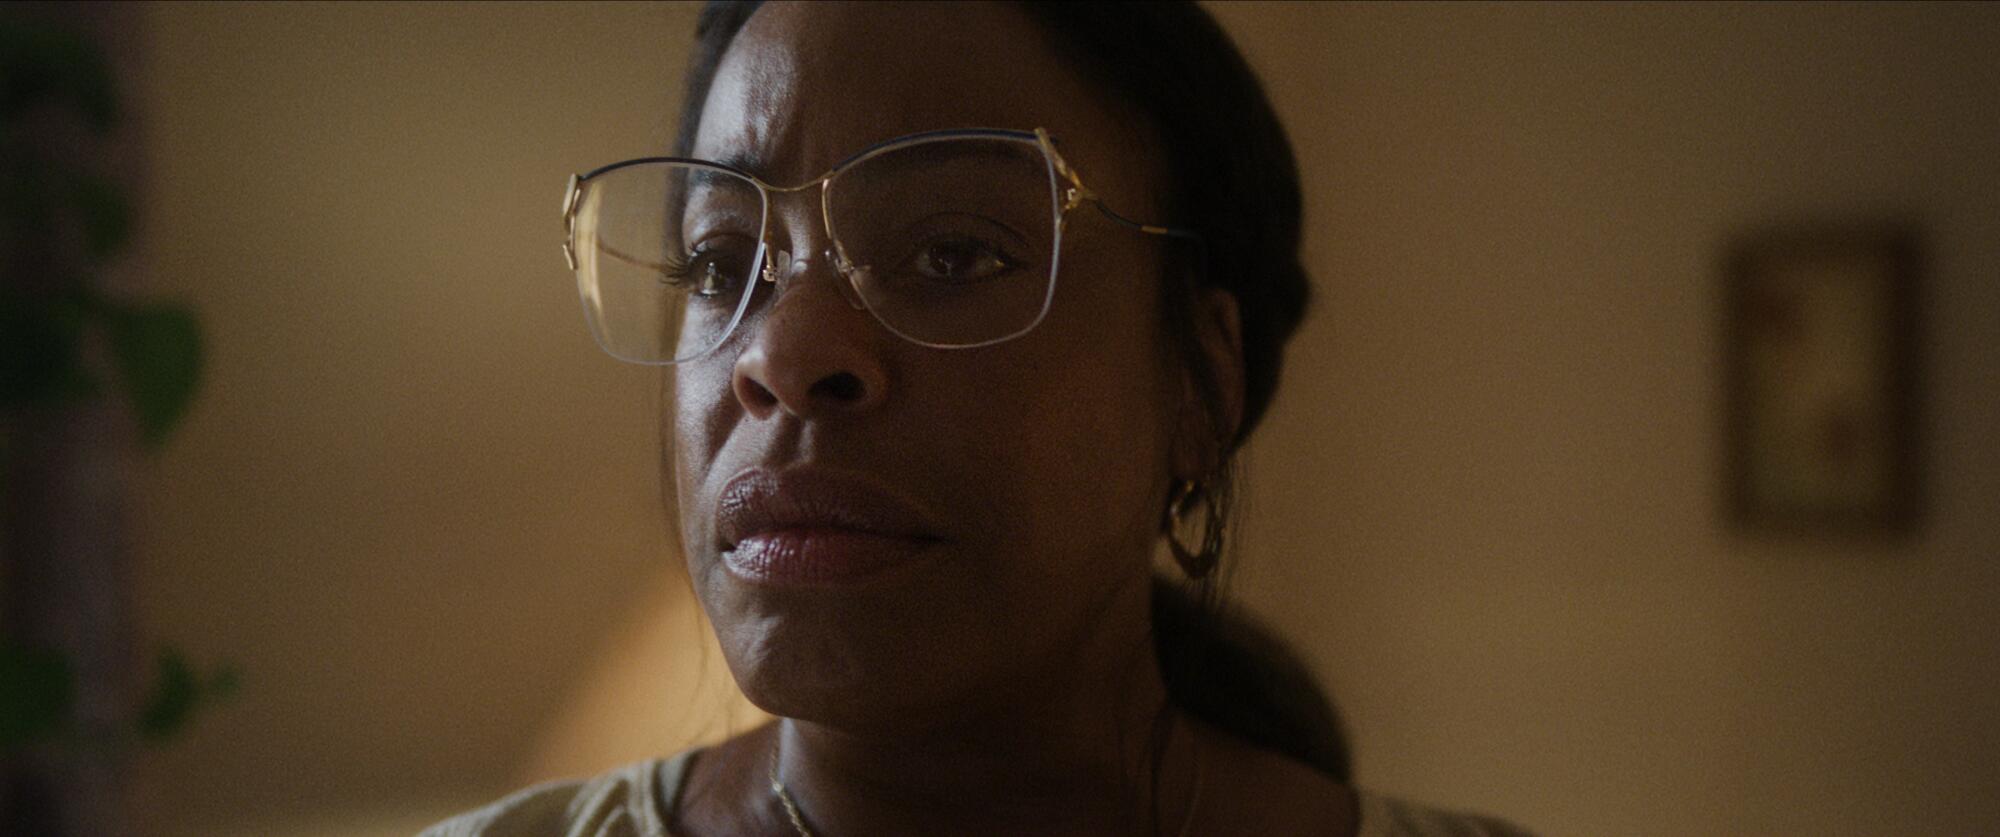 Niecy Nash-Betts wears large eyeglasses and has her hair pulled back for "Dahmer -- Monster: The Jeffrey Dahmer Story."